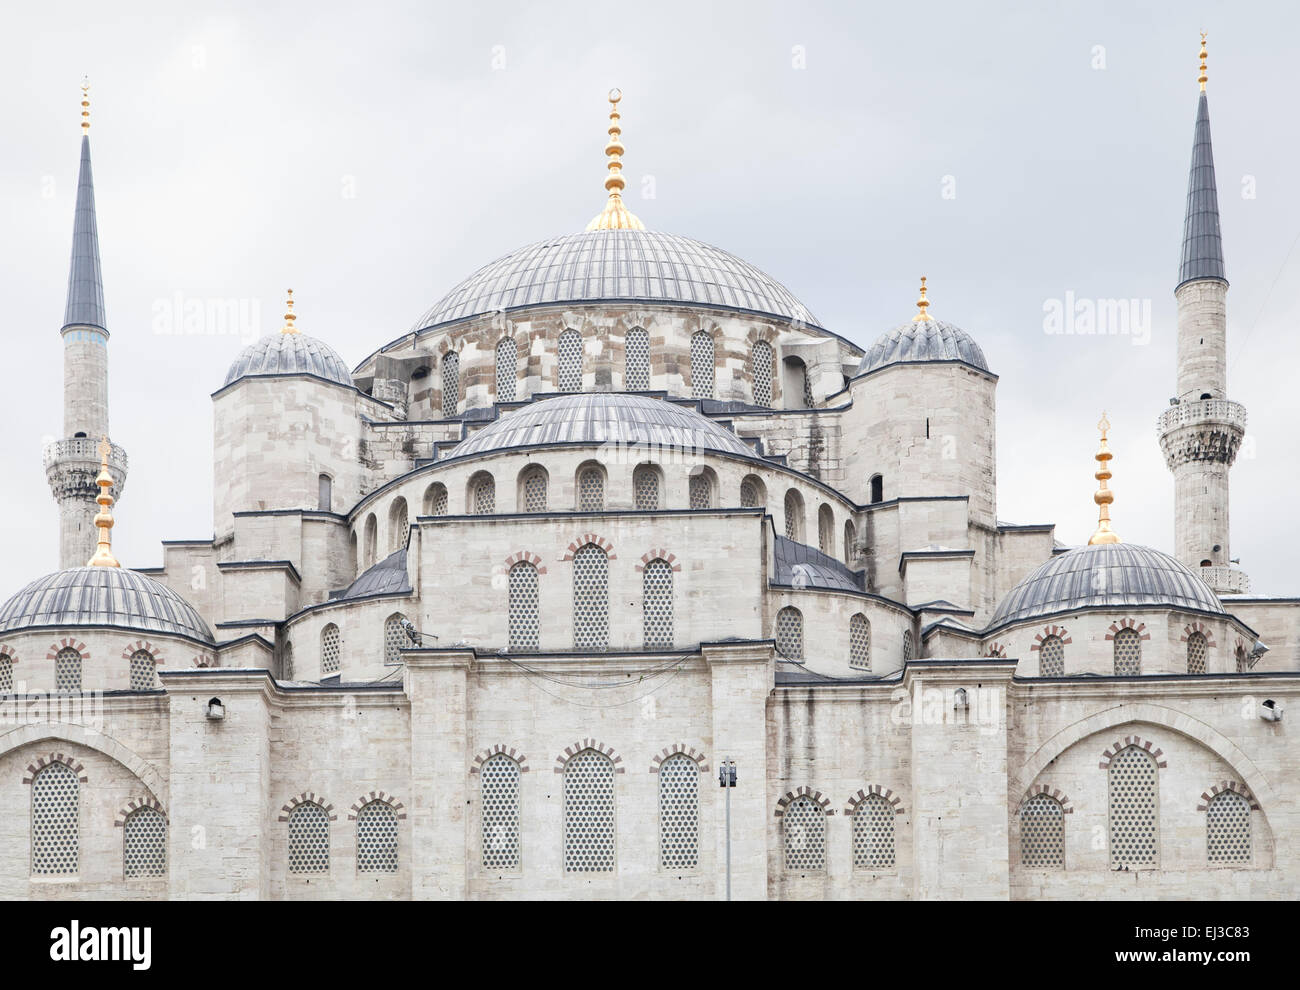 Sultanahmet (Blue mosque) in Istanbul, Turkey Stock Photo